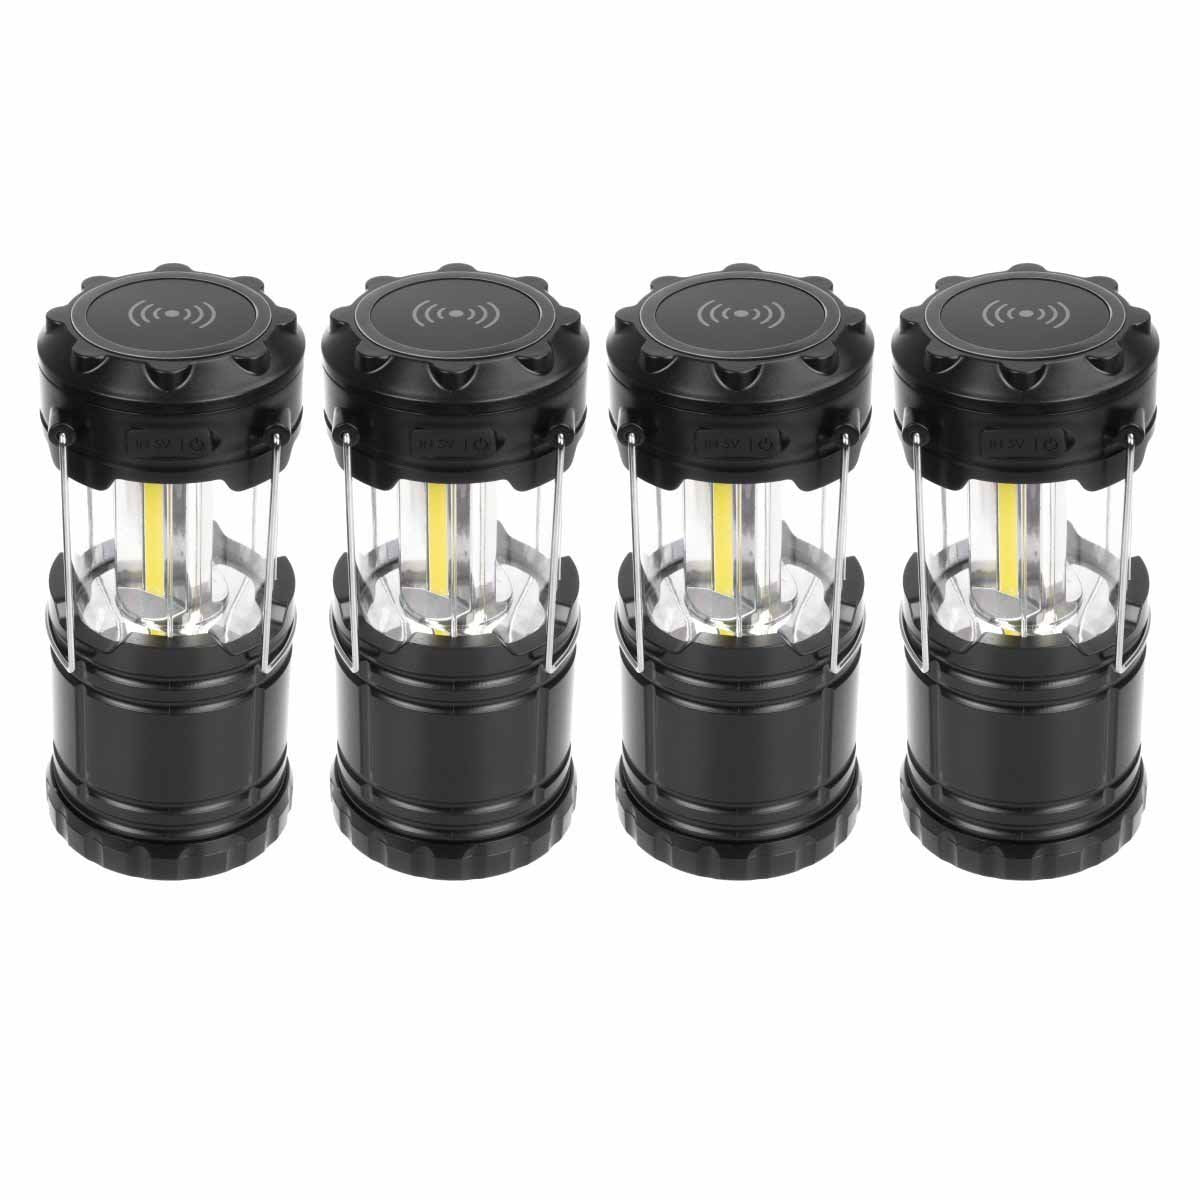 Set of 4 360-Degree Collapsible Camping Lanterns with Power Bank